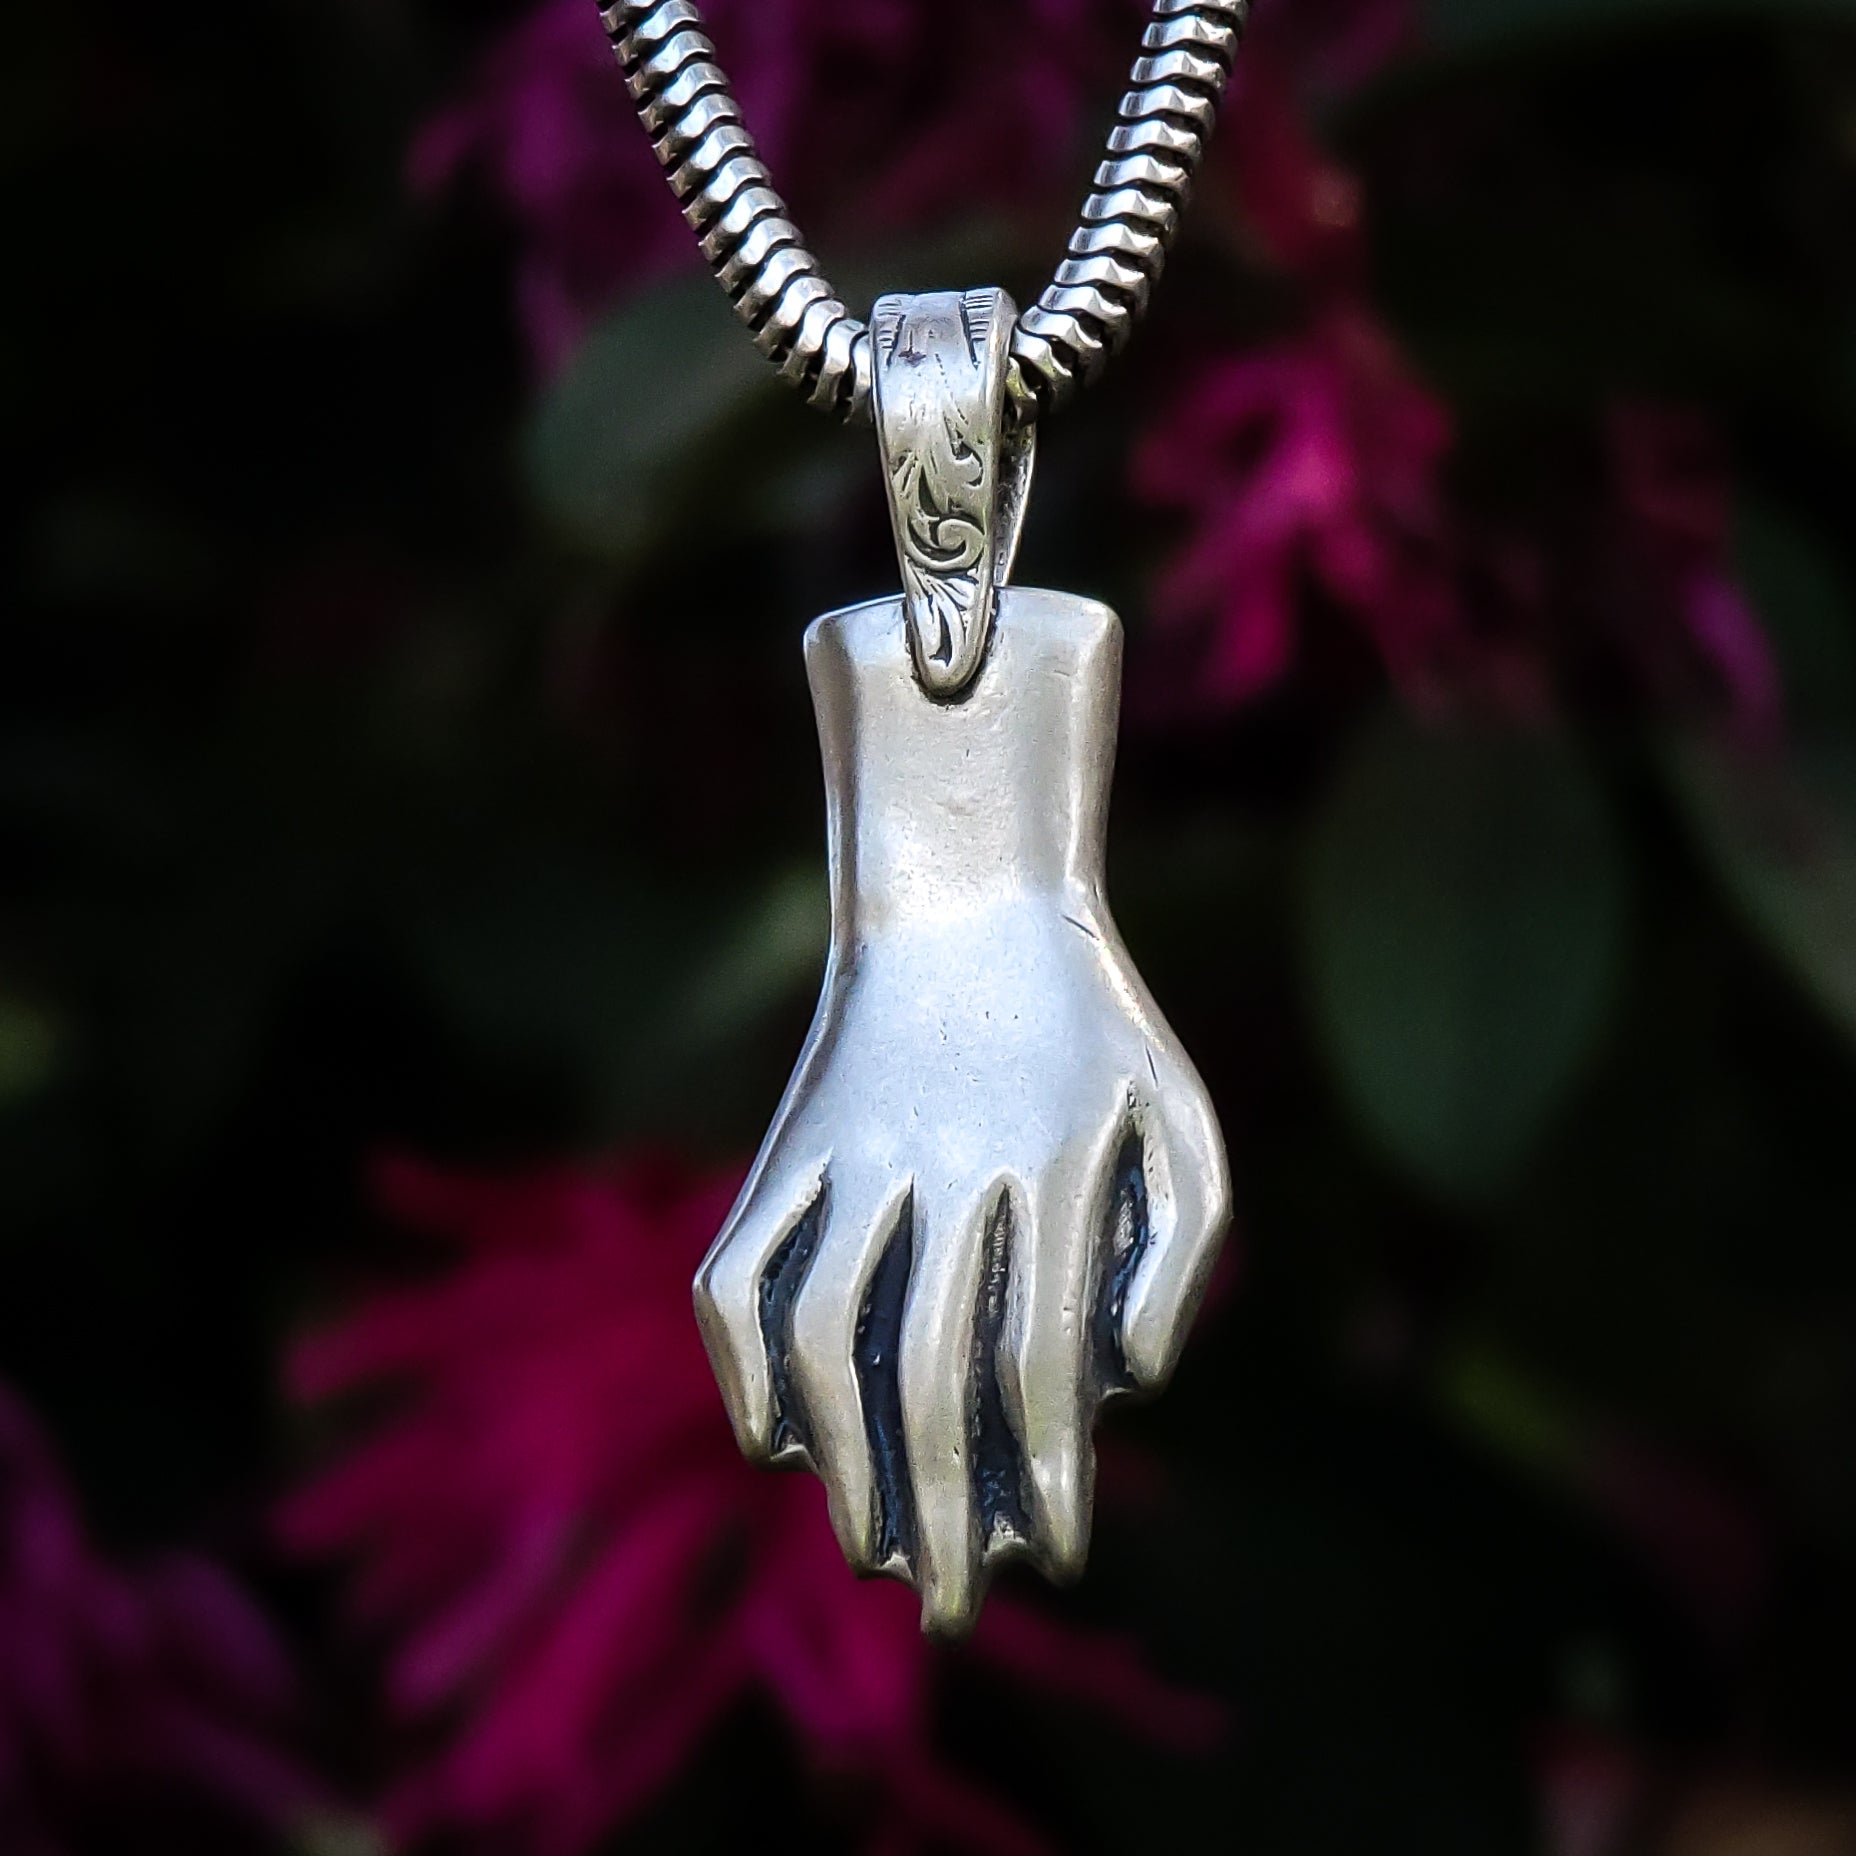 In this photo, a sterling silver pendant in the shape of a hand is suspended in front of a flowering tree. The pendant is delicately detailed, with outstretched fingers that suggest a sense of openness and welcome. It is positioned in the center of the frame, with the tree in the background, slightly out of focus. The pendant stands out against the blurred background, gleaming in the light and casting delicate shadows on the surface beneath it.